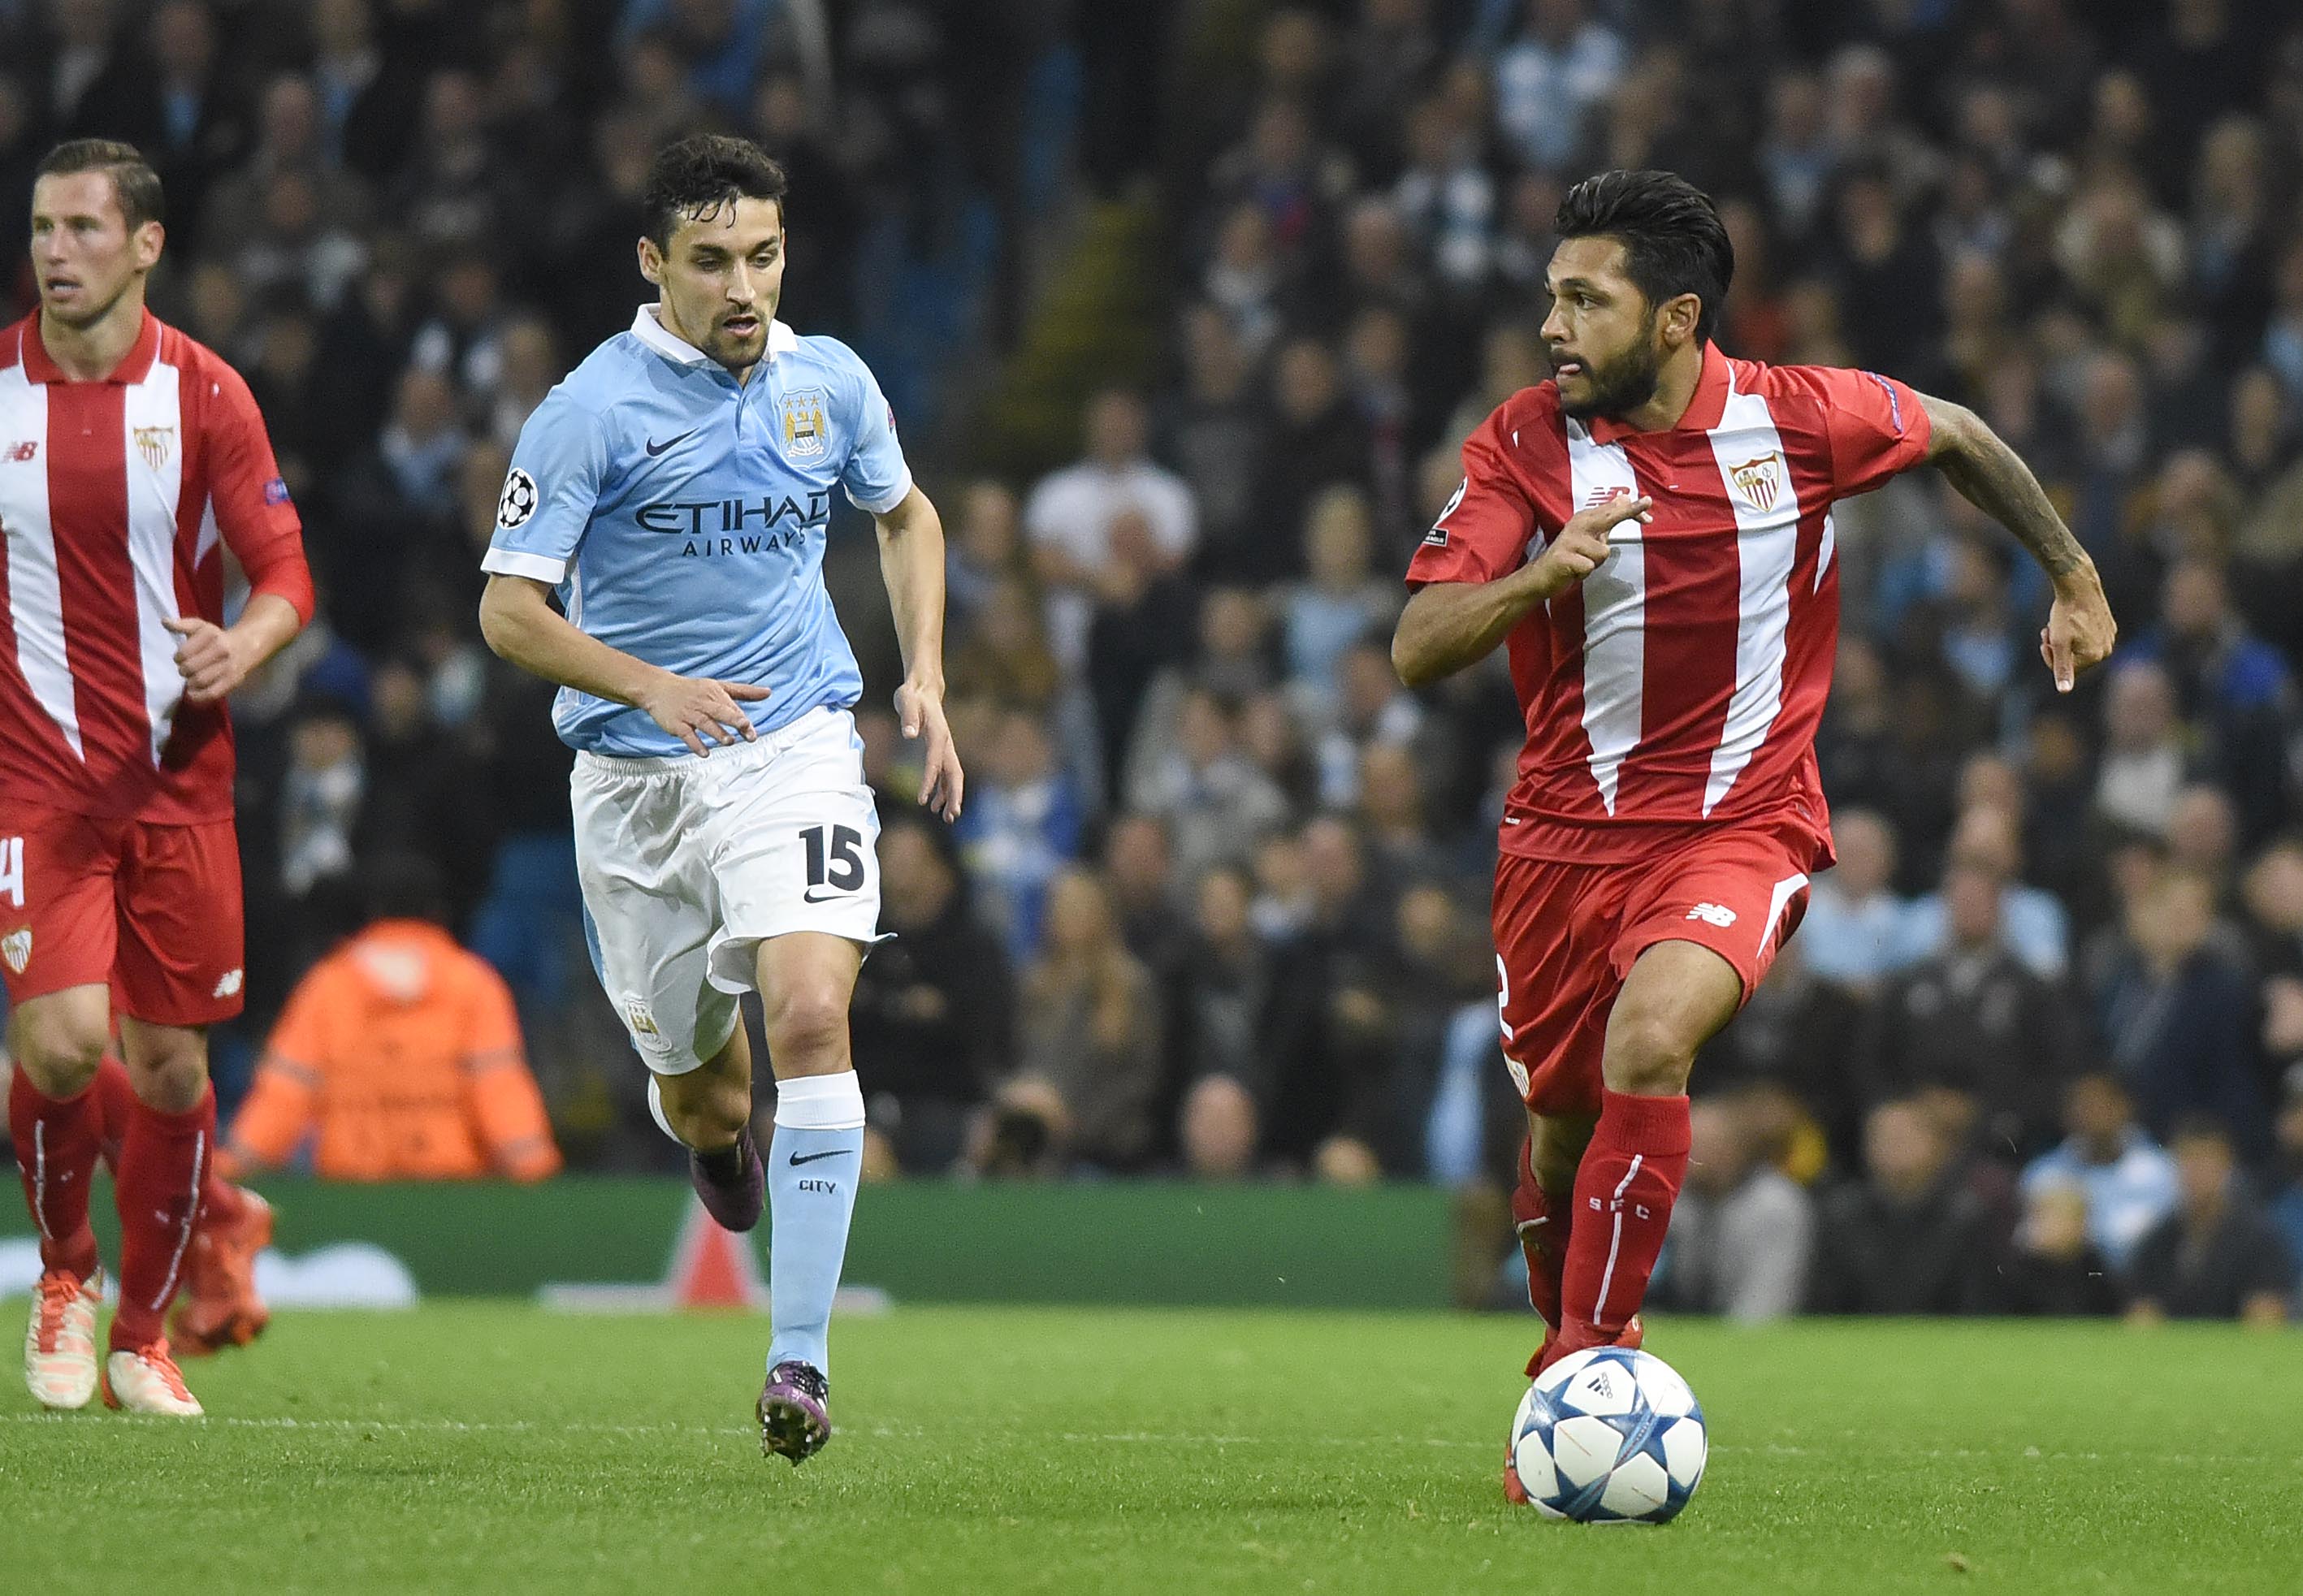 Tremoulinas in a Champions League game against Manchester City